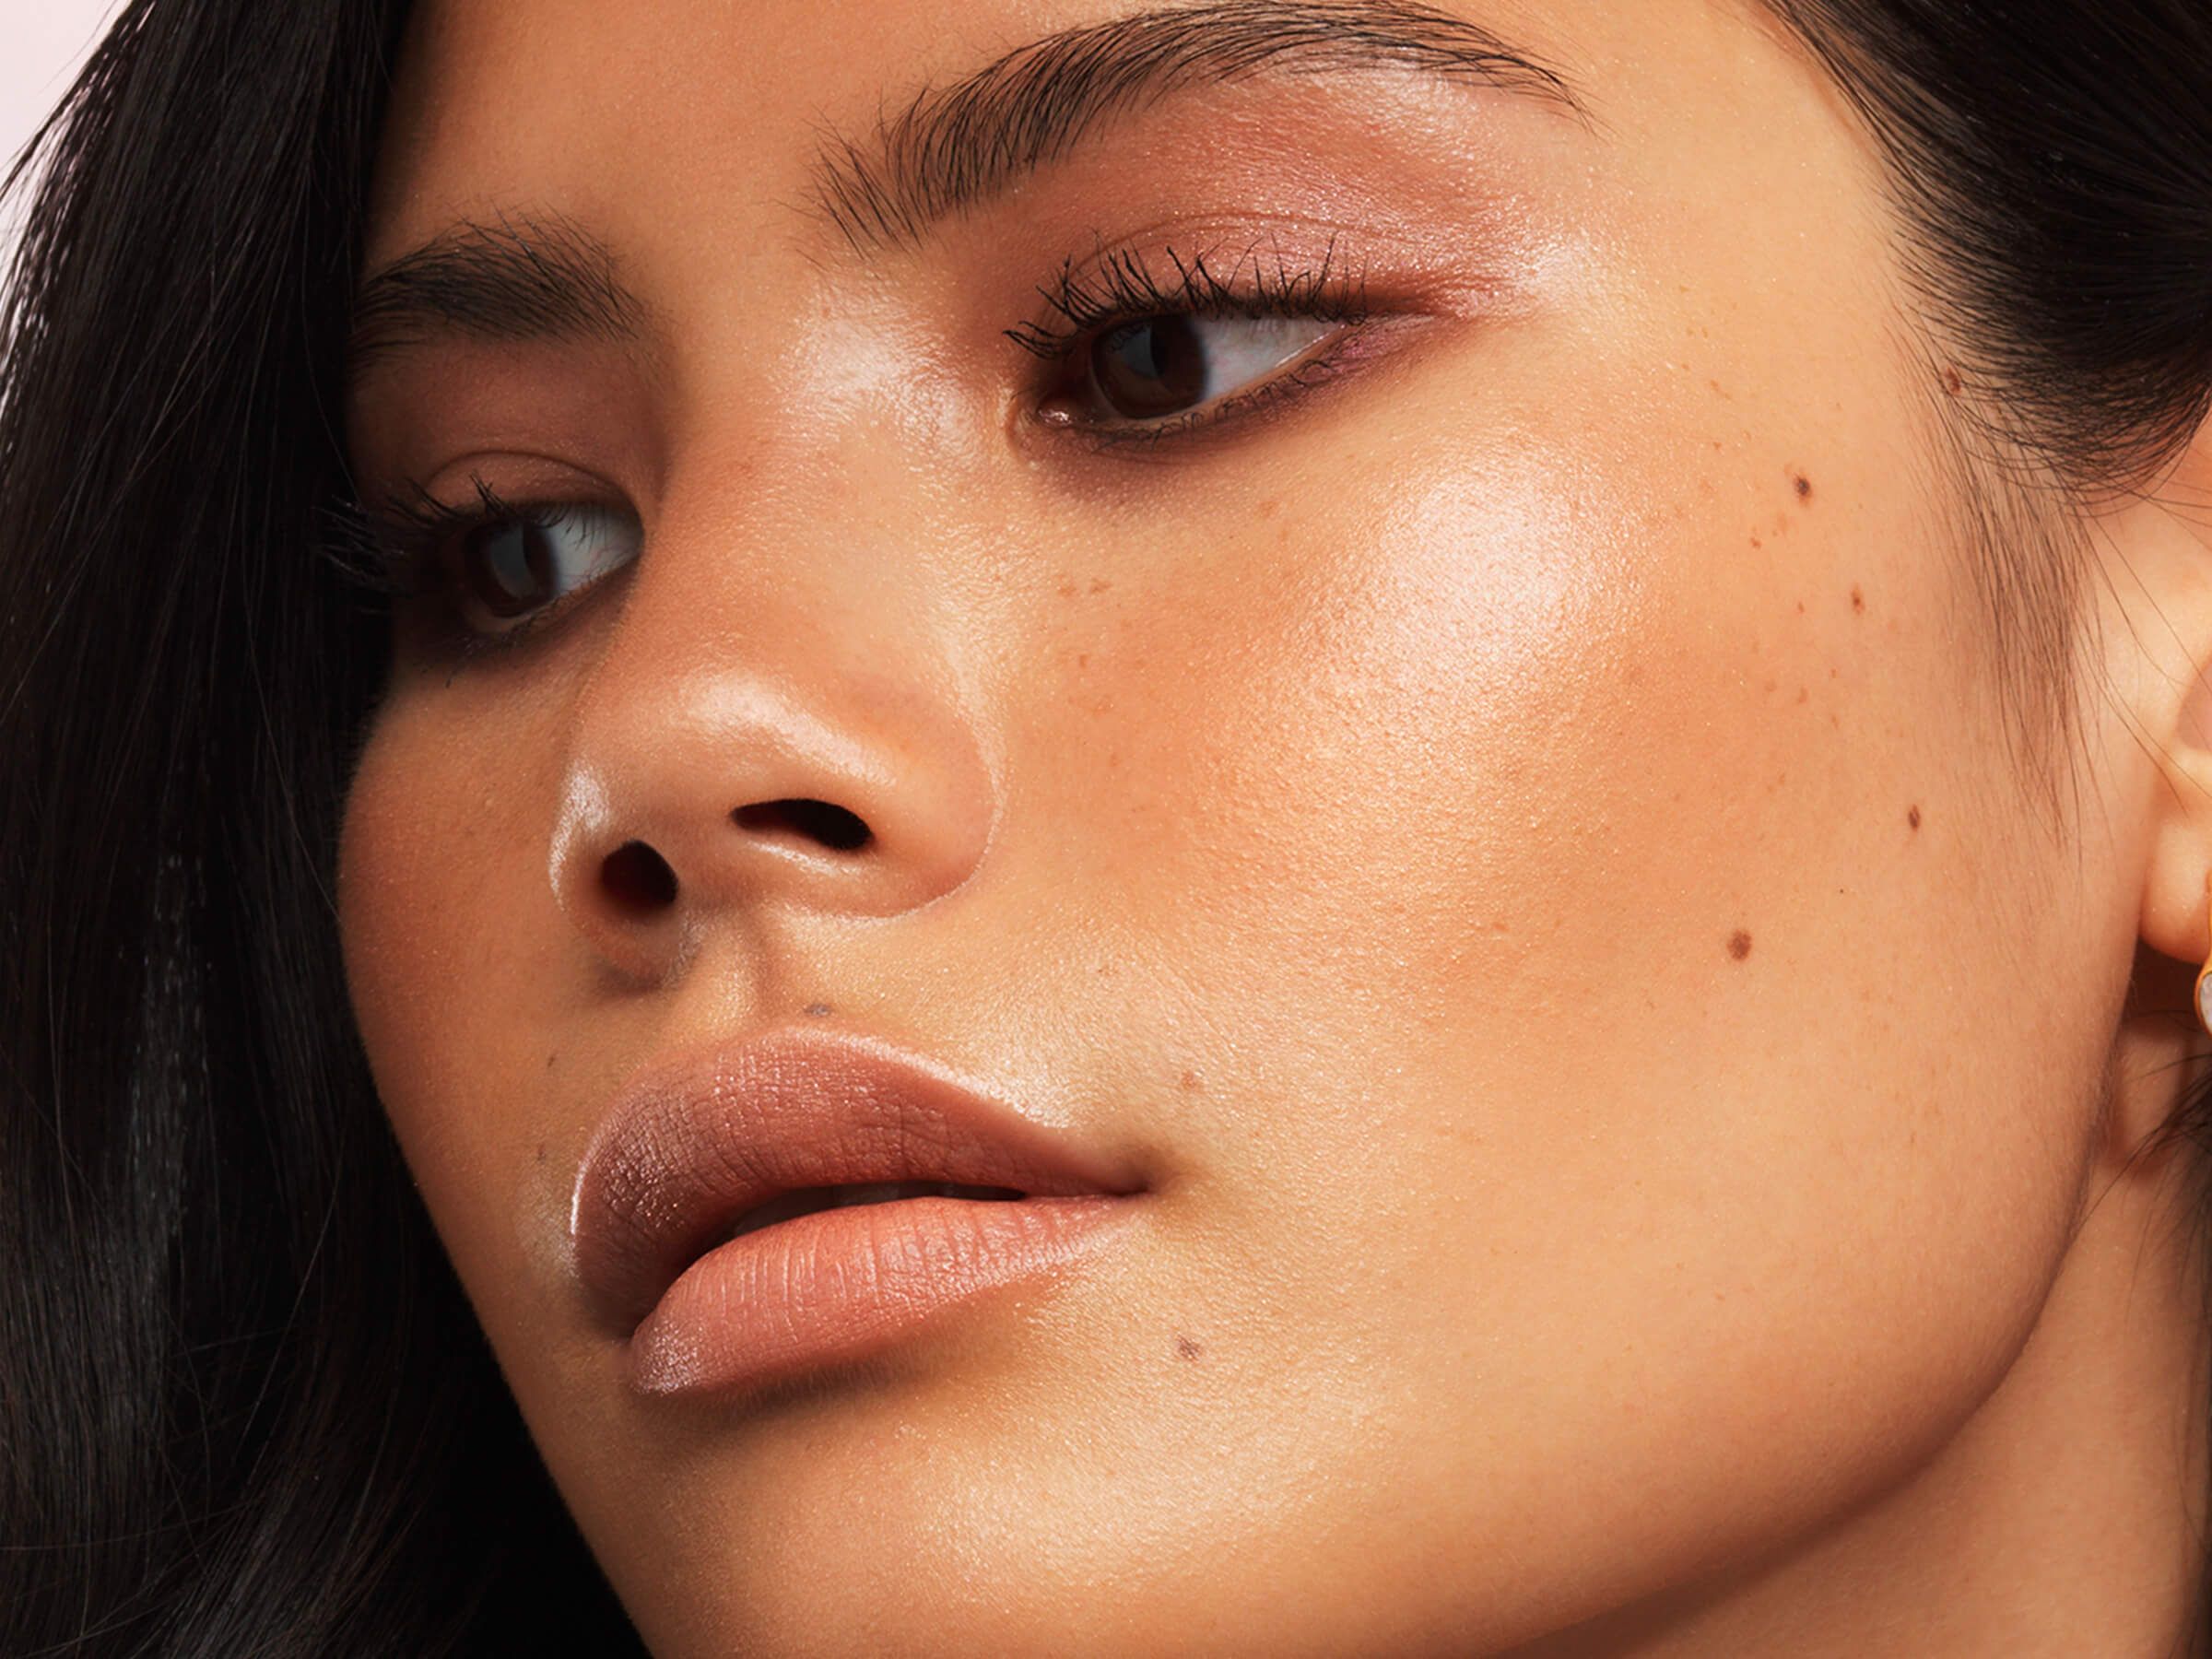 Model with summer highlighter beauty trend